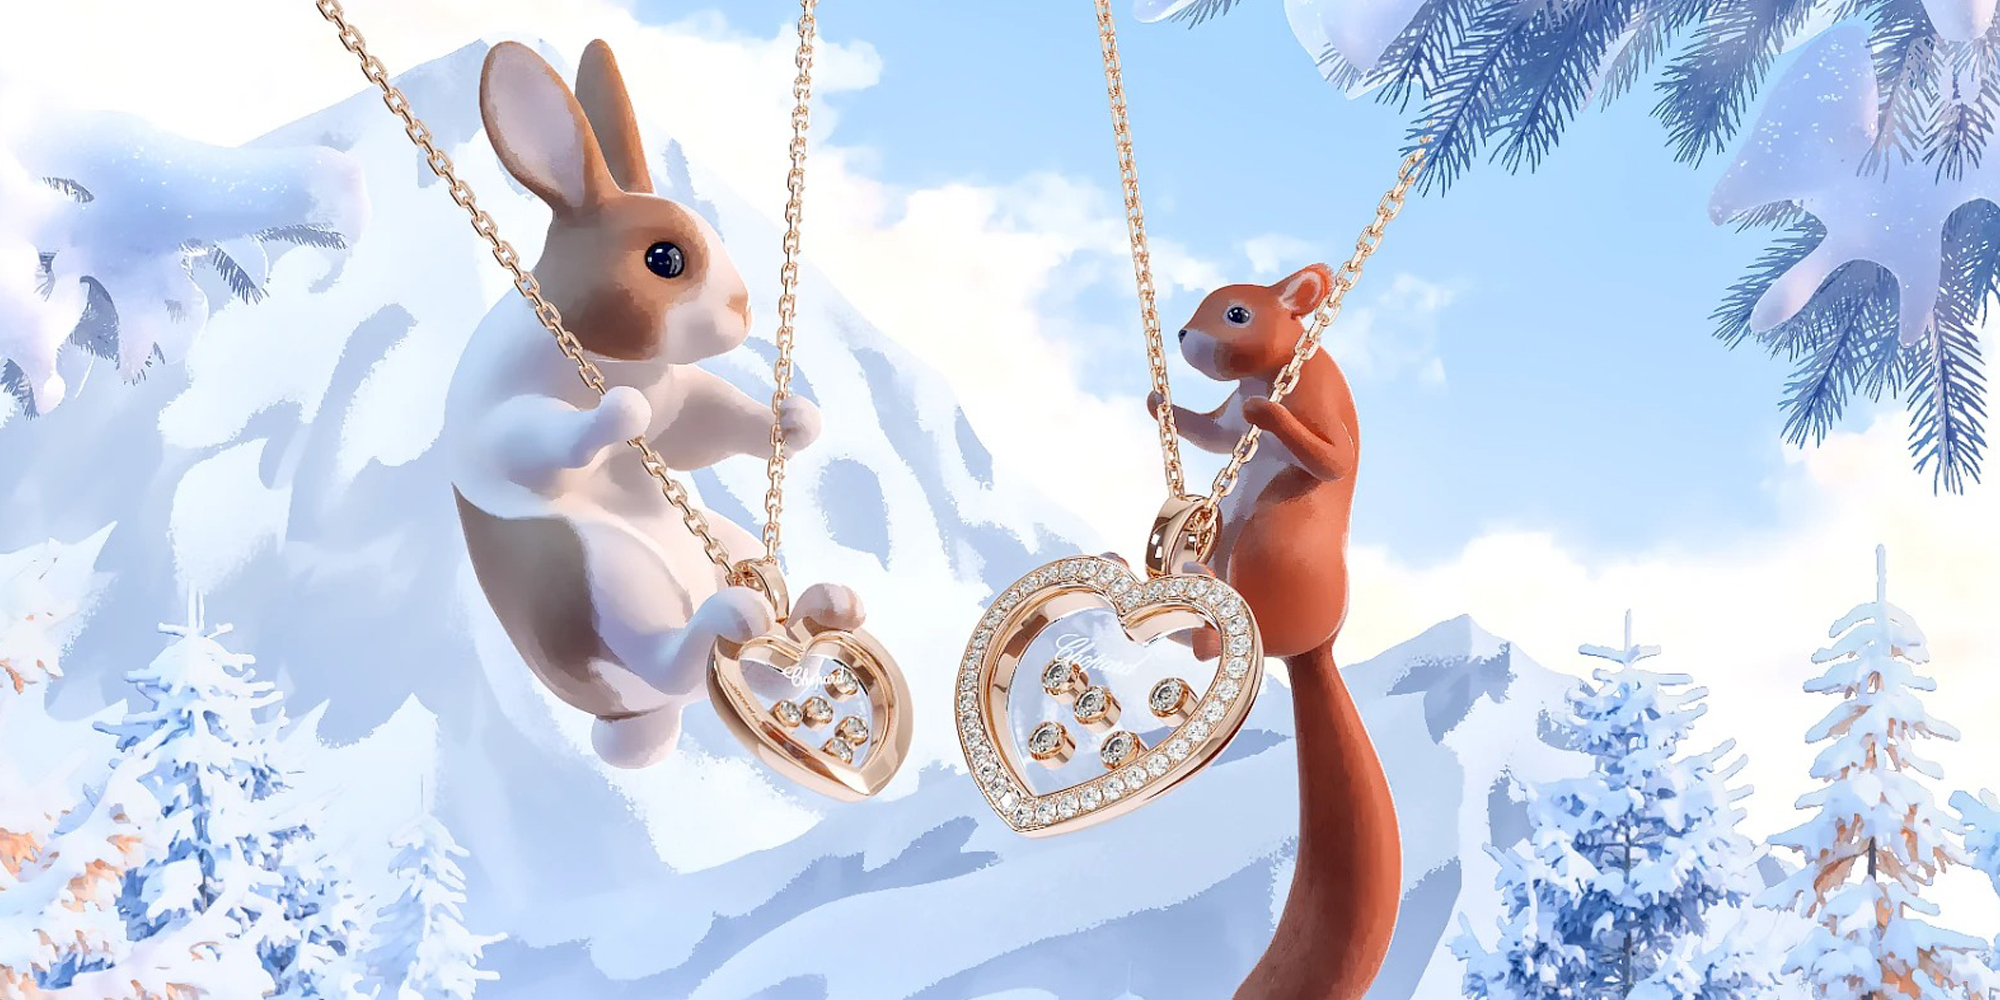 CHOPARD HOLIDAY 2022 GIFT SELECTION